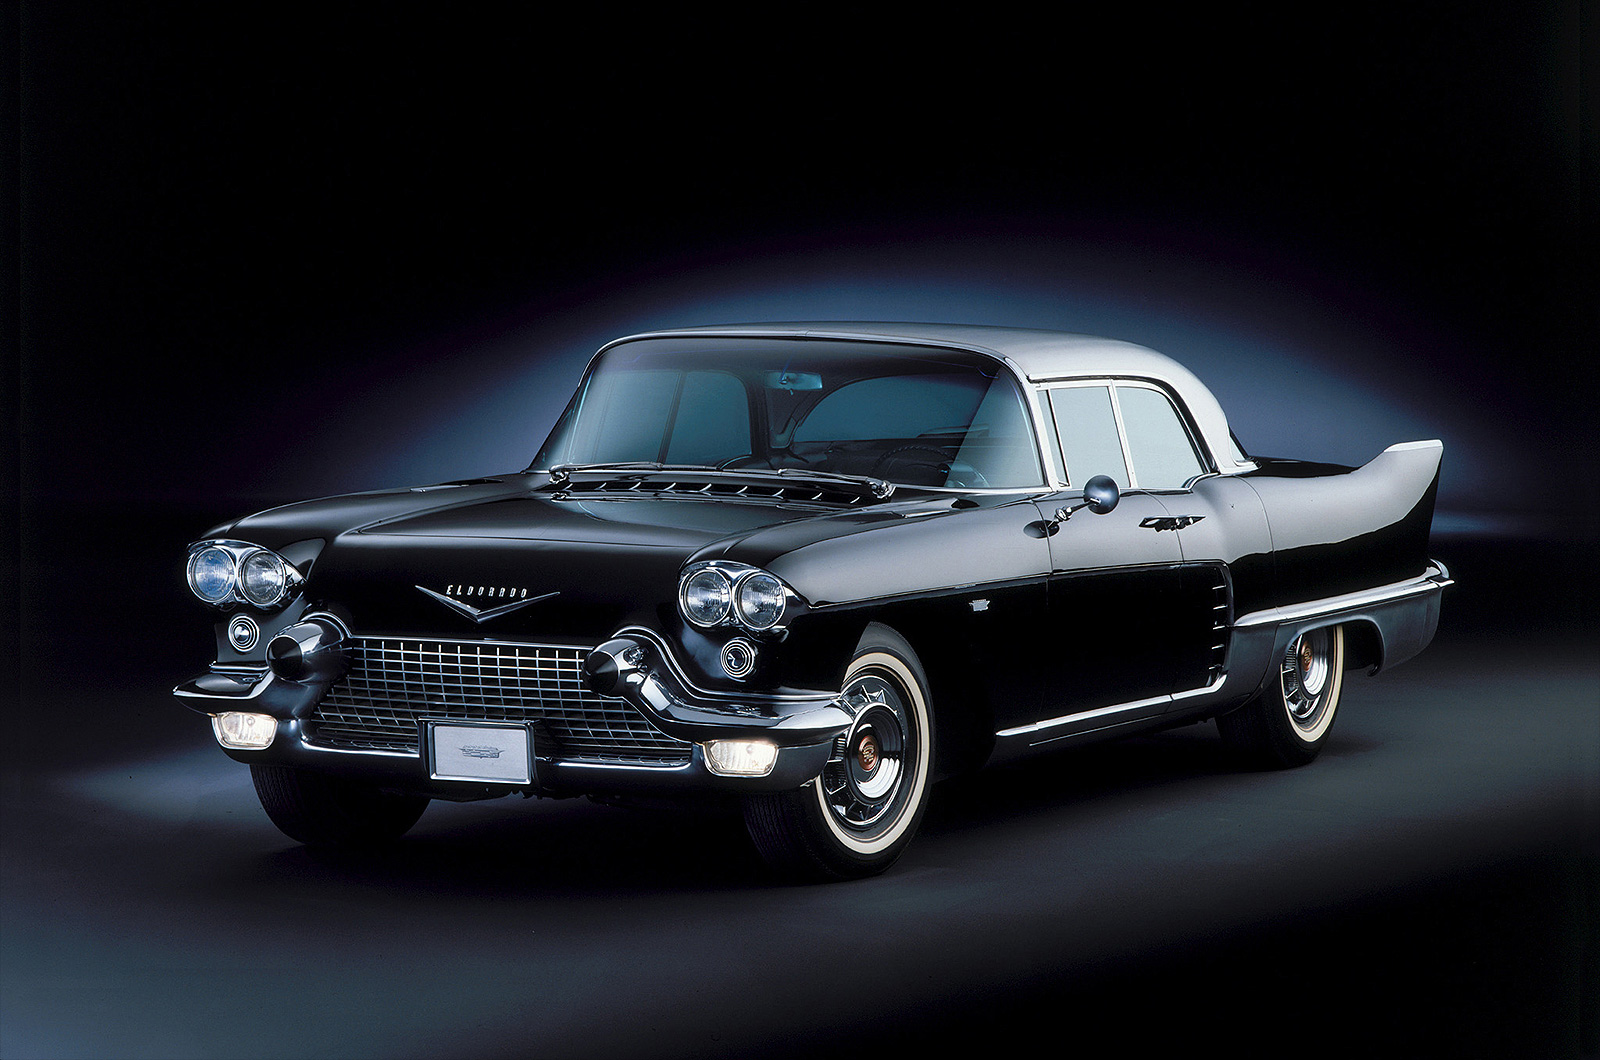 <p>A feature that even now is fitted to only the most luxurious of cars, <strong>Cadillac</strong> introduced air suspension on its top-of-the-line models for the 1957 model year, giving a true magic carpet ride. It also improved body control and handling. As with many pioneers, this particular journey wasn’t straightforward and the system initially proved unreliable.</p><p>GM threw everything at this flagship car; another first notched up by the car were <strong>memory power seats</strong>. It cost $13,074 – twice the price of a standard Eldorado, and the equivalent of <strong>$121,000</strong> today – and was even pricier than equivalent Rolls-Royces. 704 were built in 1957-1958.</p><p><strong>GROUNDBREAKER SCORE: 6 </strong>– a step up in comfort for luxury cars.</p>